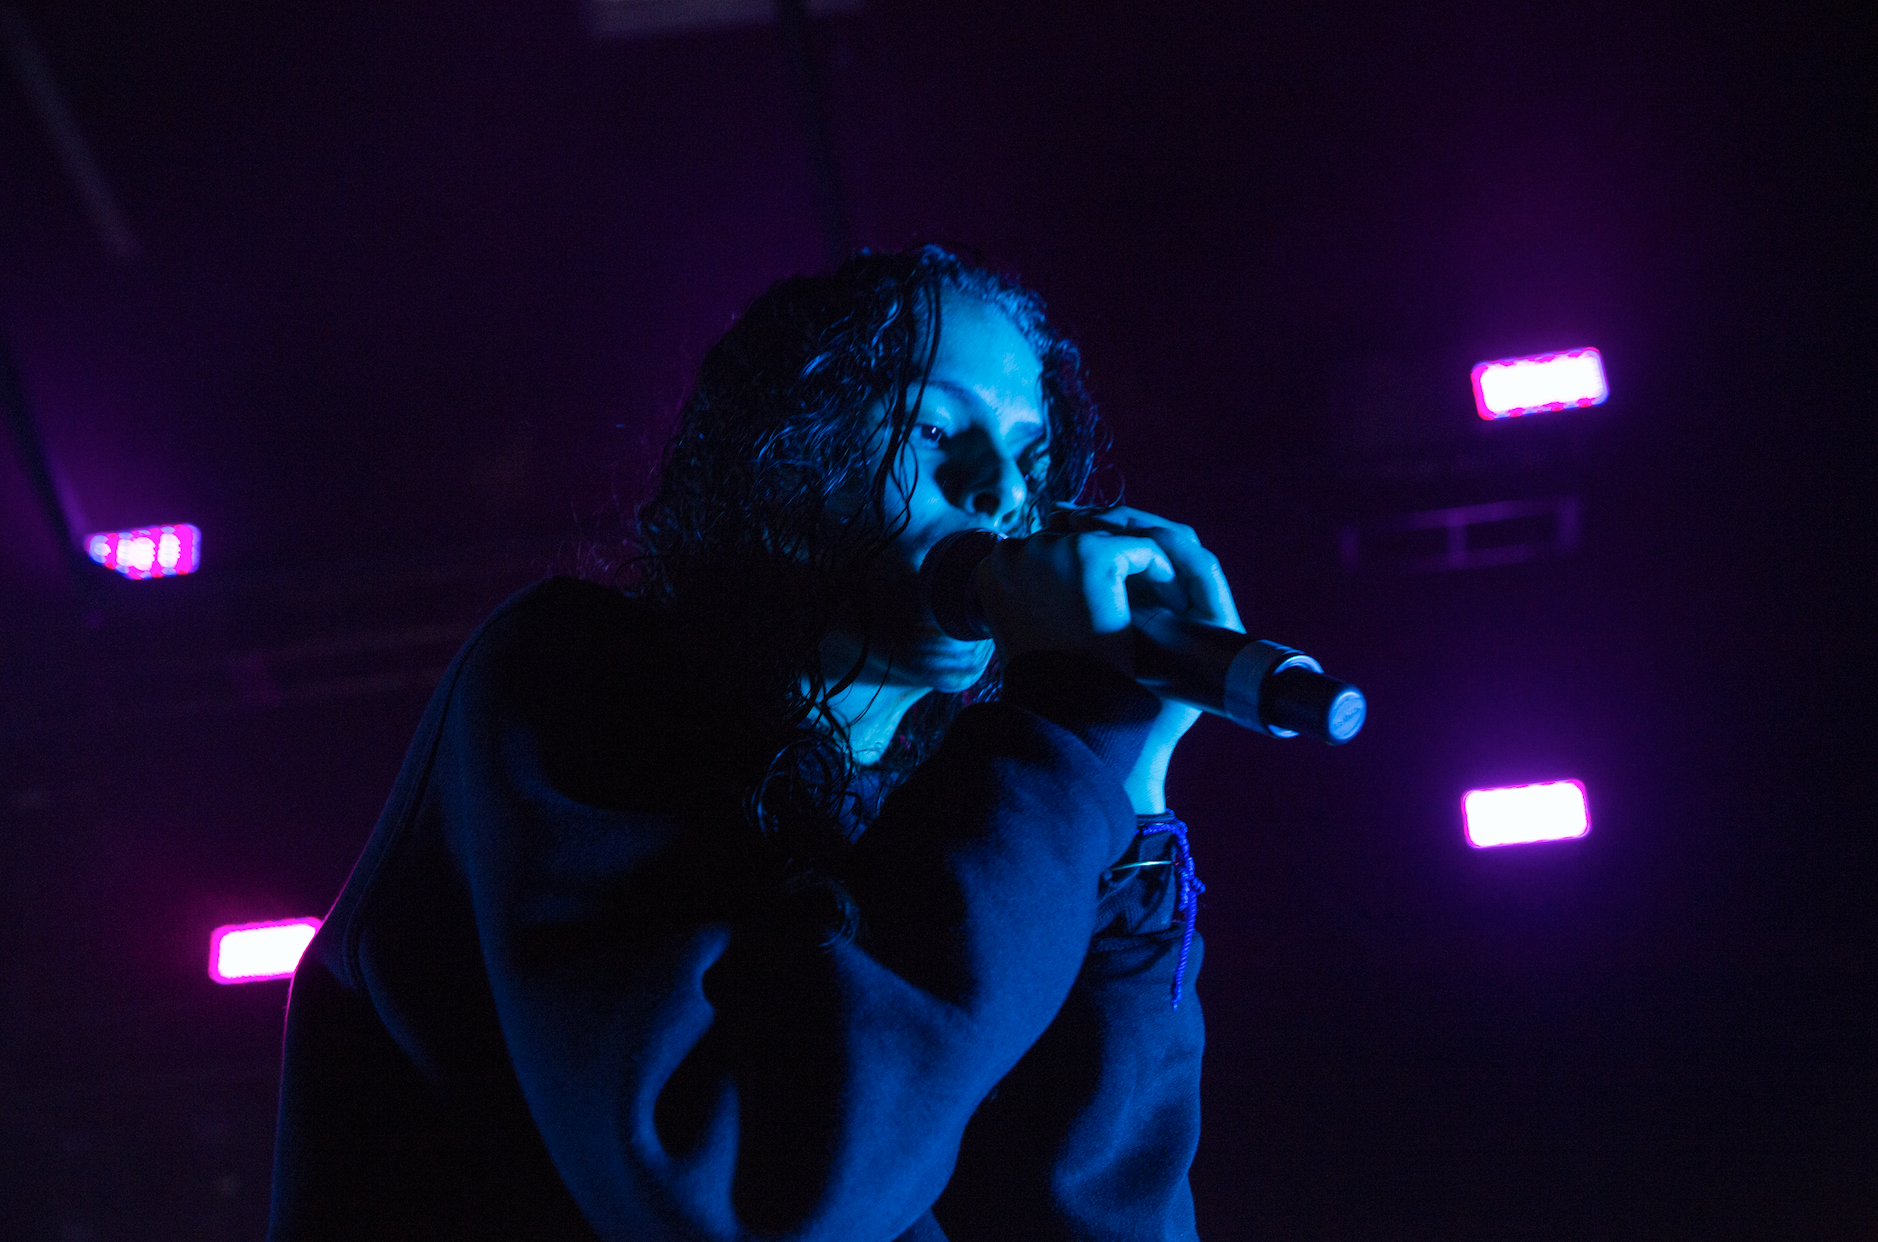 Concert+in+Review%3A+The+1975